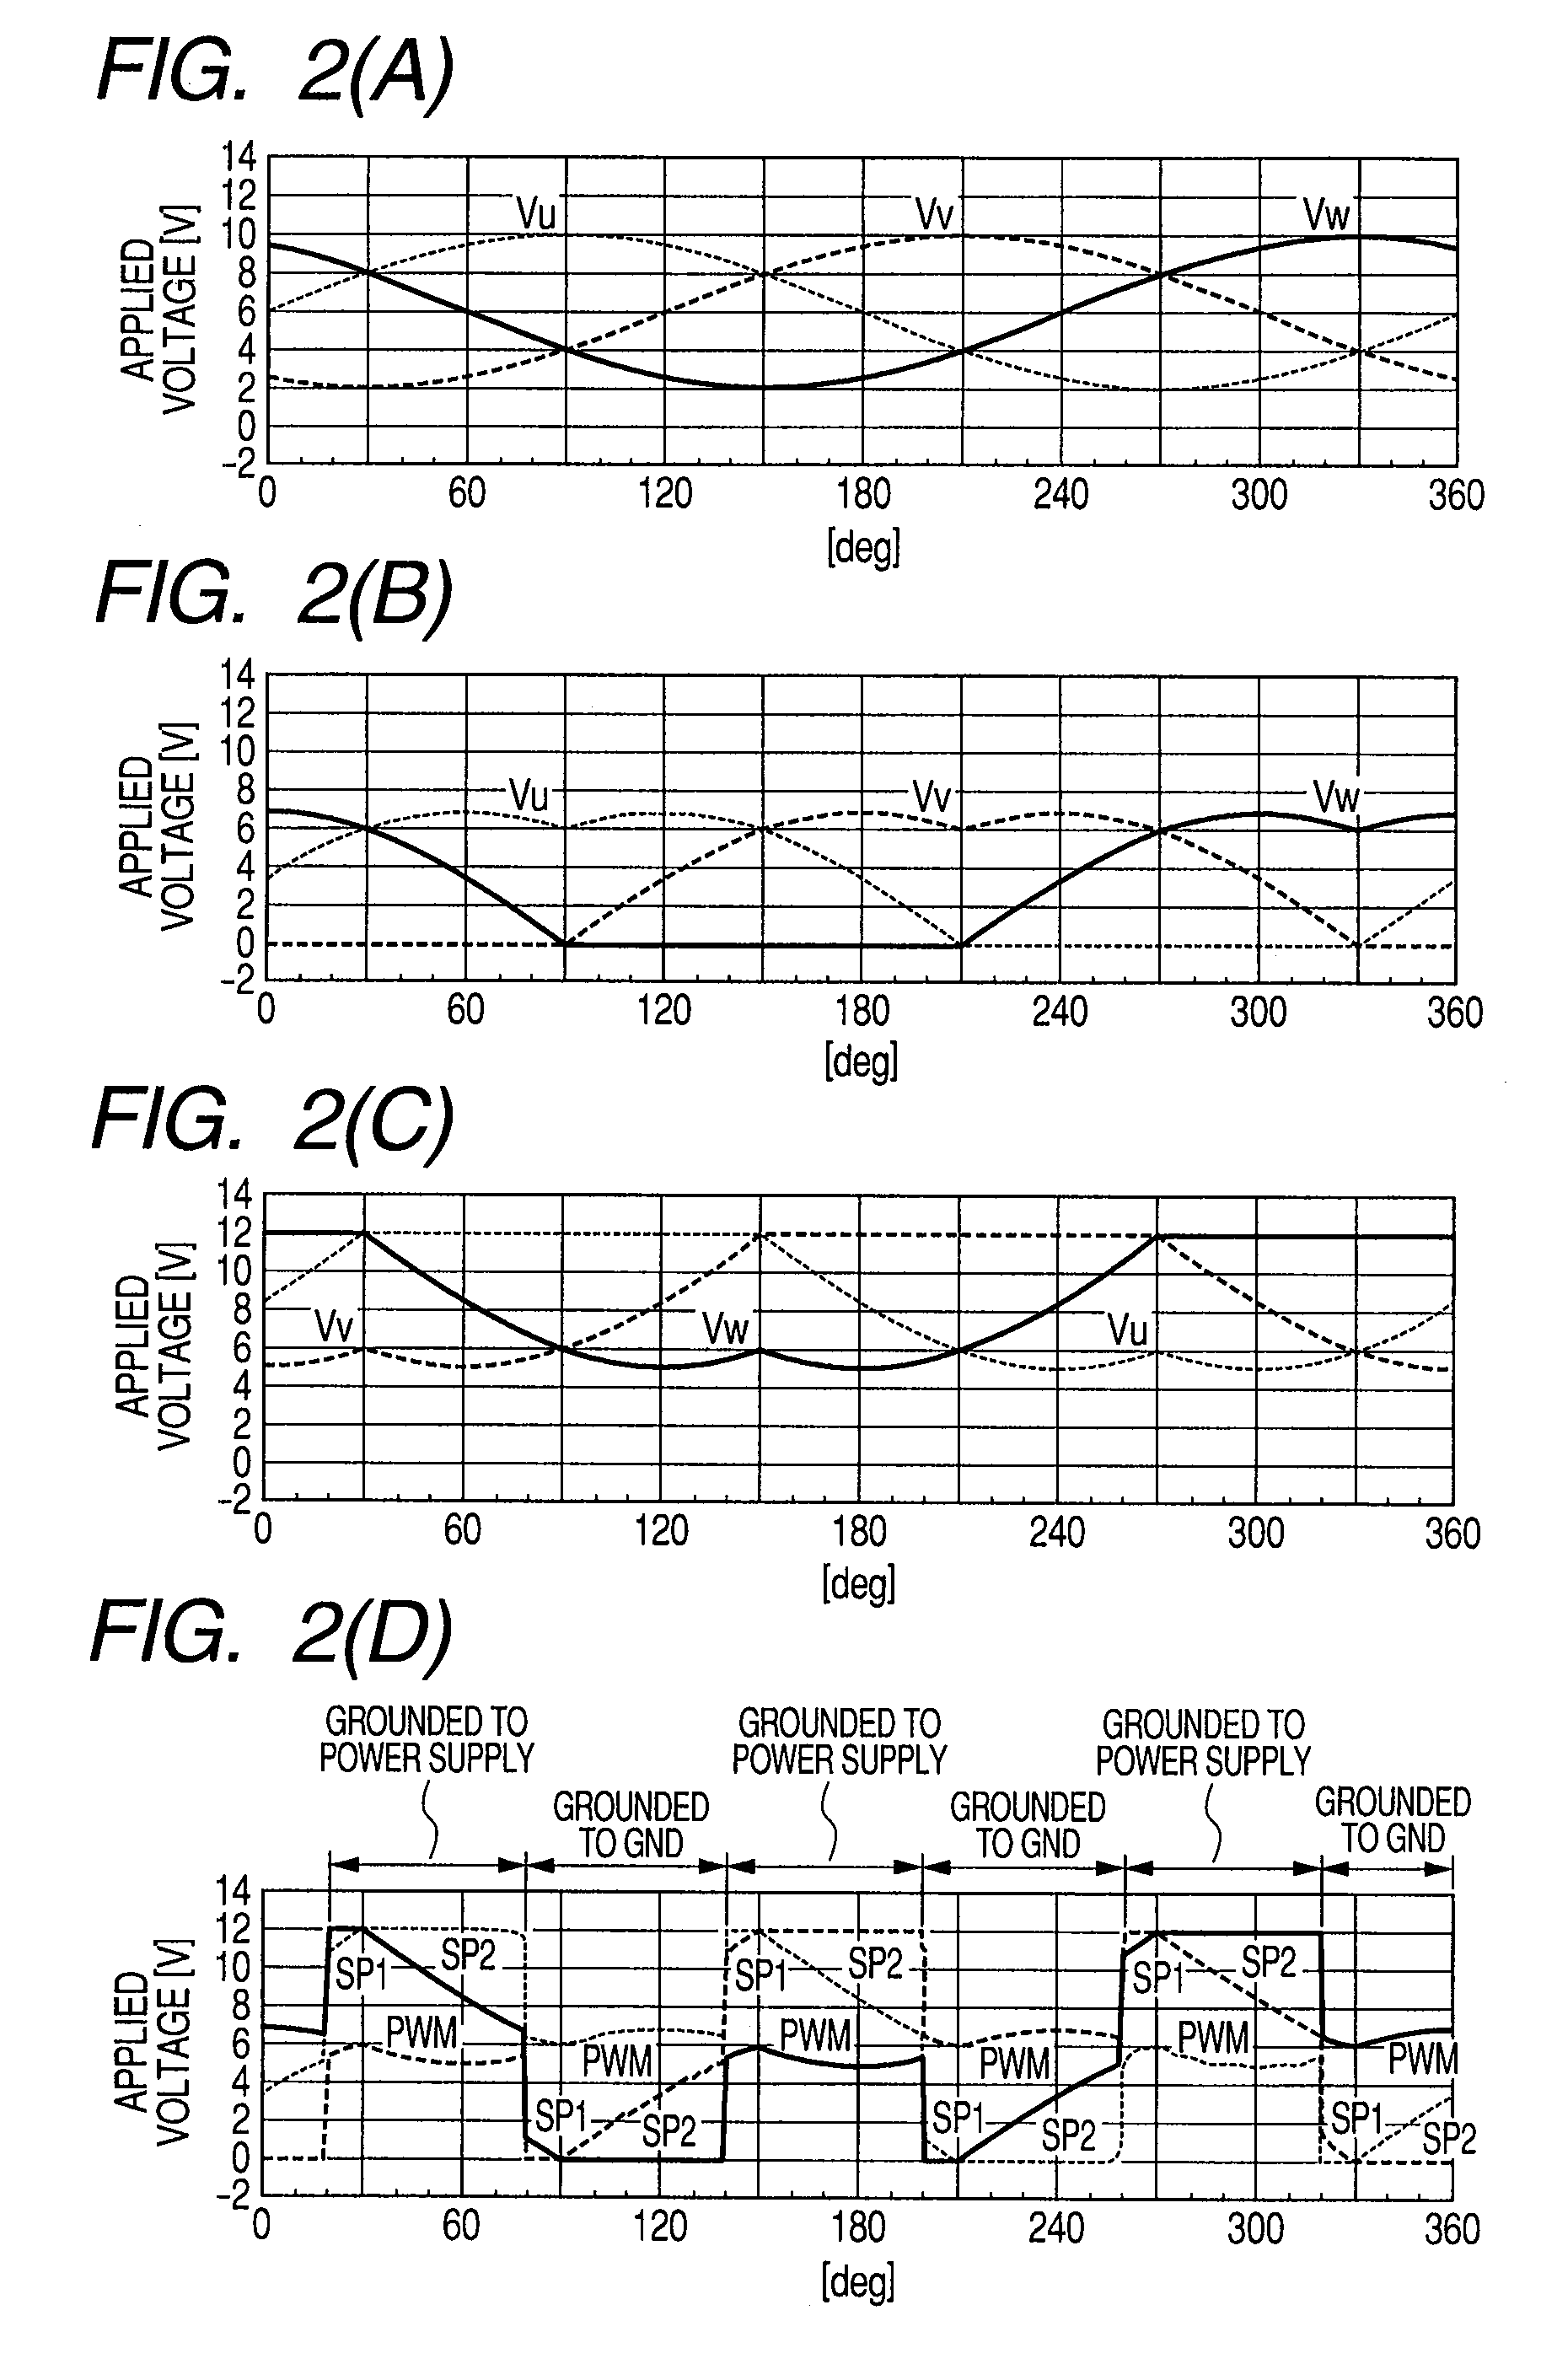 Motor driving apparatus and method for control of motor revolution